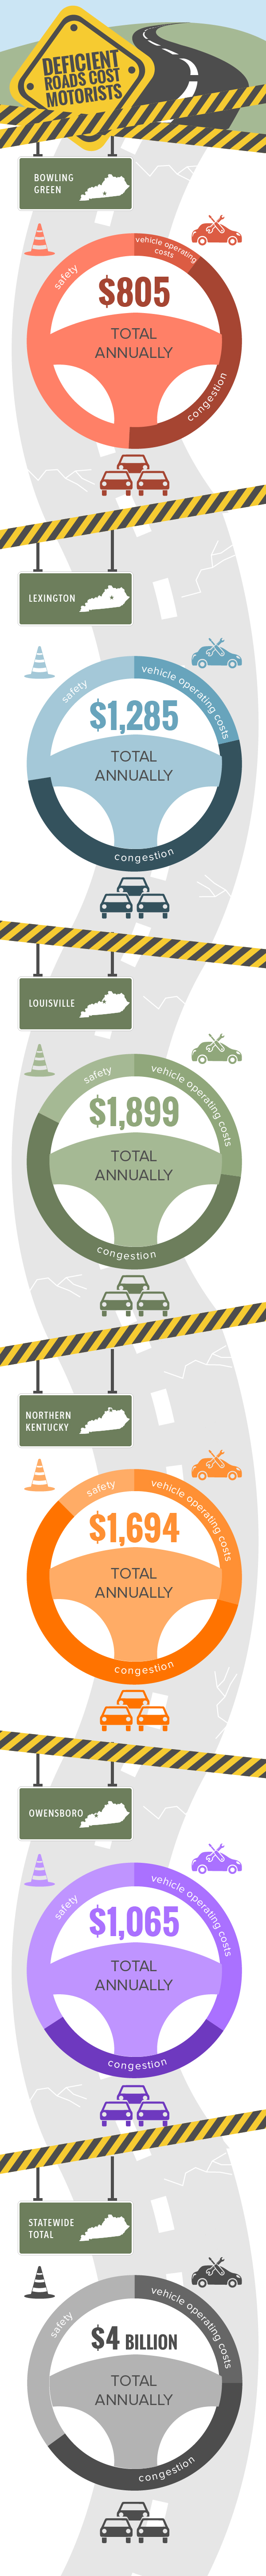 Kentucky Deficient Roads Infographic By Locality